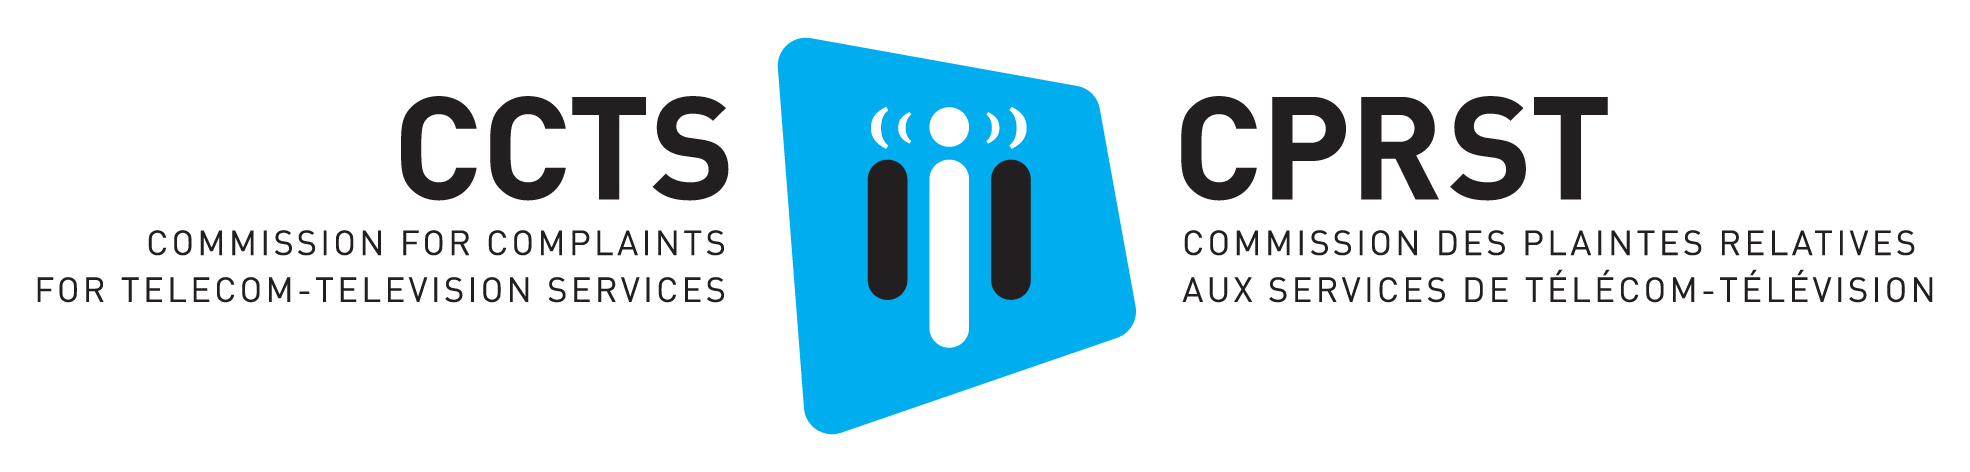 Organization logo of Commission for Complaints for Telecom-television Services